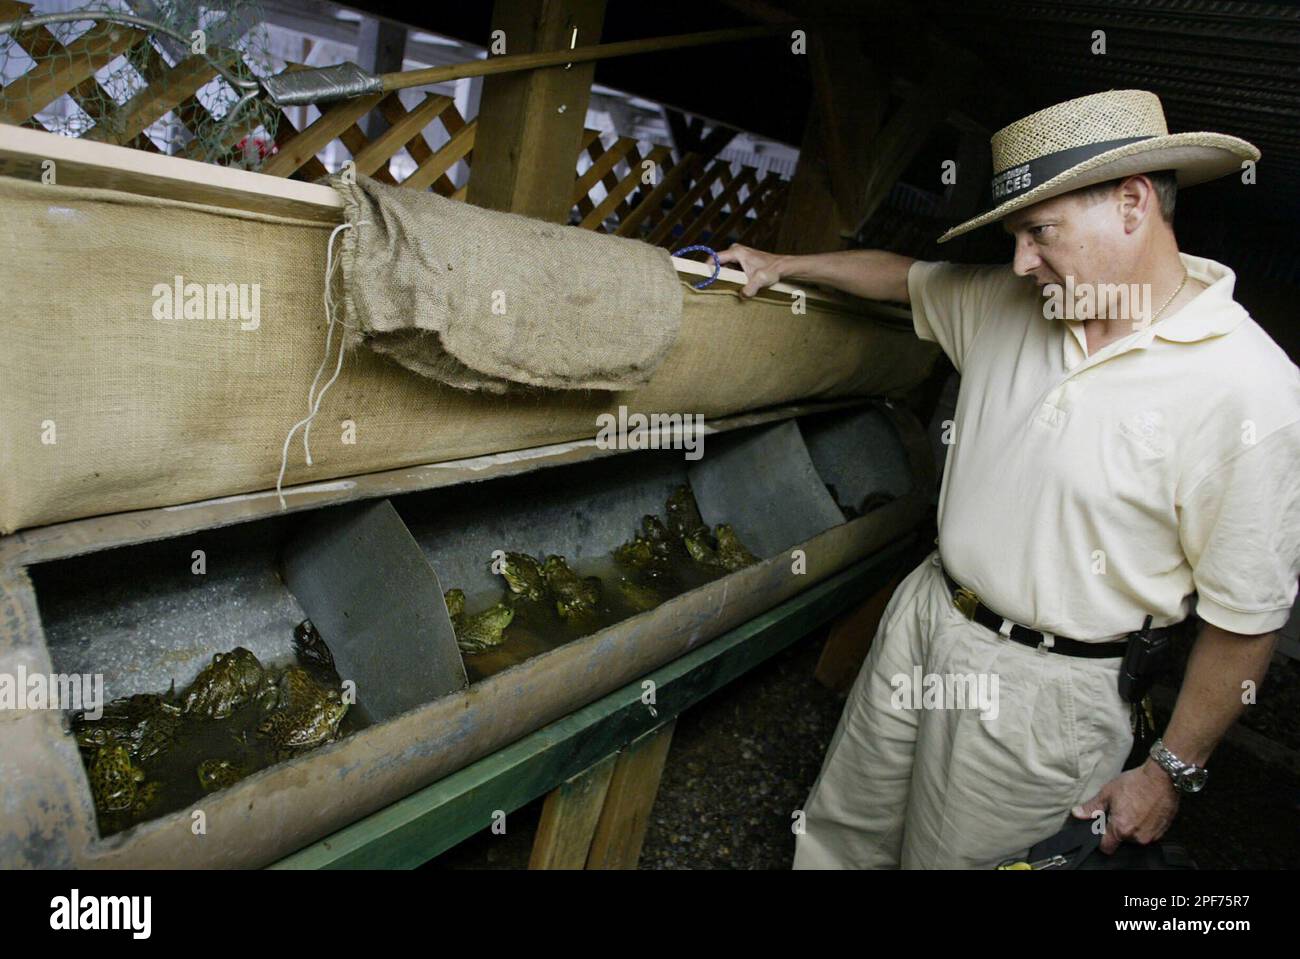 California Department of Fish and Game, Associate Fisheries biologist Stafford Lehr looks at holding pens for jumping frogs during the kids competition of the 75th Annual Jumping Frog Jubilee at the 2003 Calaveras County Fair in Angels Camp, Calif., Thursday, May 15, 2003. He and Fish and Game official Ed Pert toured the 75th annual contest this week, seeking ways to minimize the potential spread of disease and avoid seeding the aggressive nonnative bullfrogs into the few remaining locations where native red-legged and yellow-legged frogs survive. (AP Photo/Dino Vournas) Foto Stock